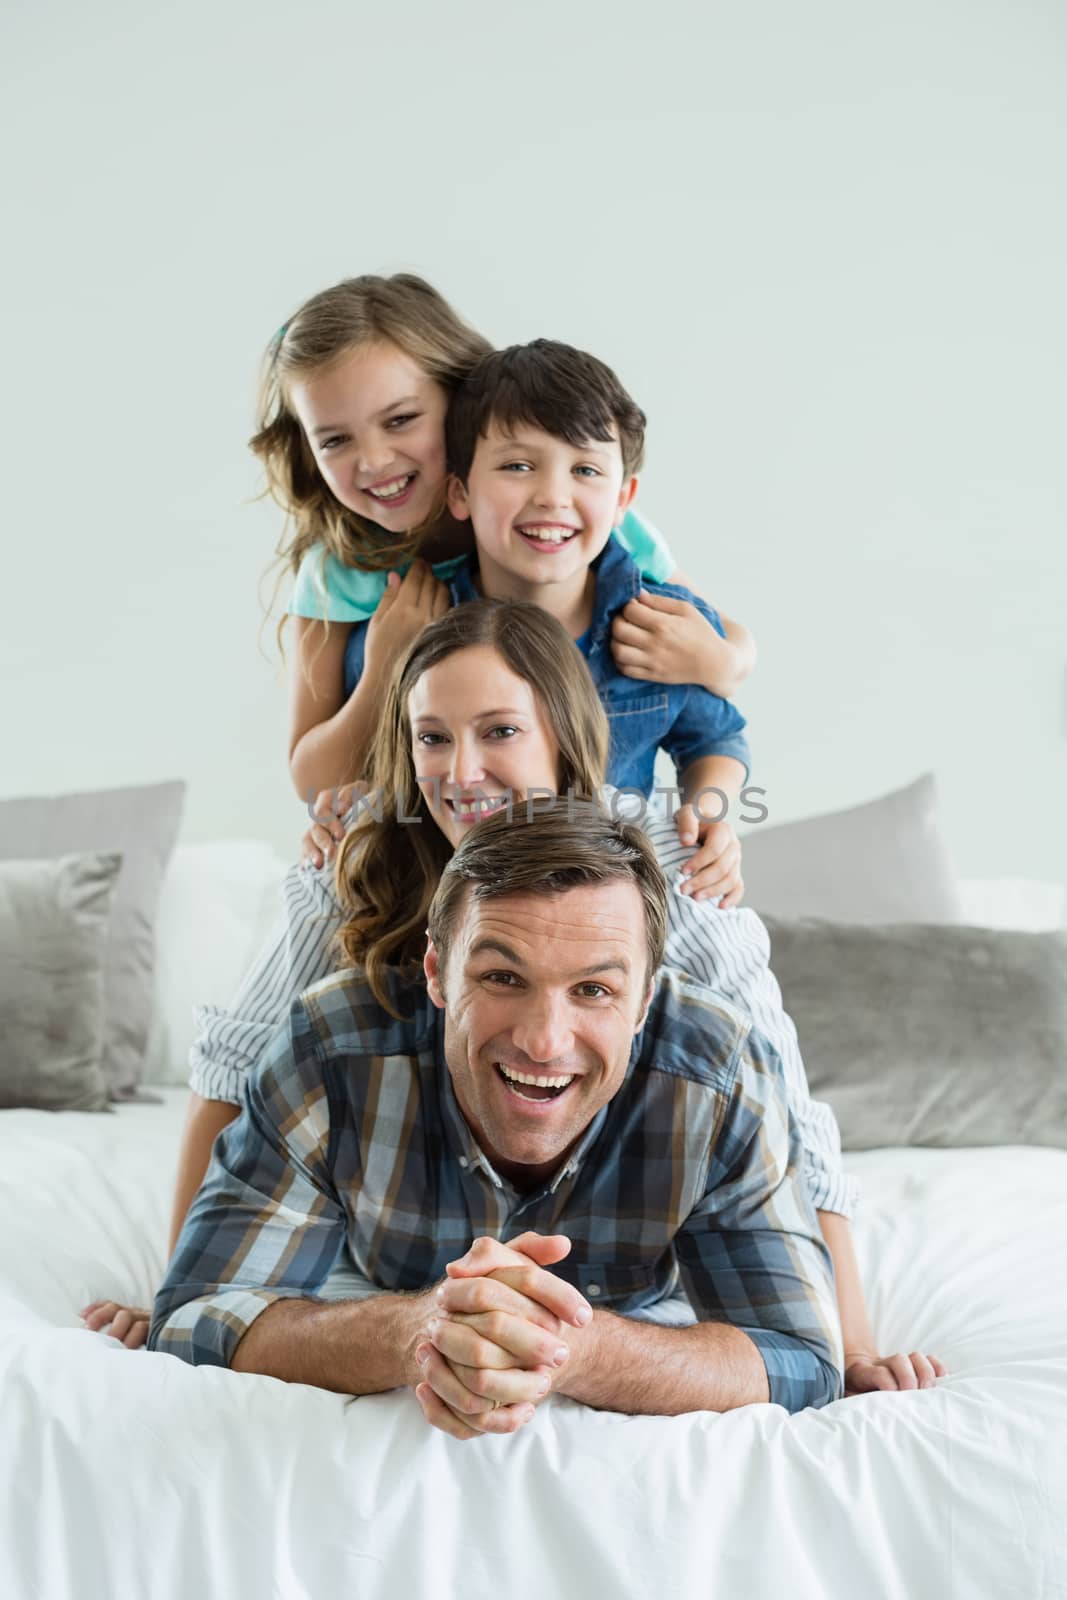 Portrait of smiling family playing on bed in bedroom by Wavebreakmedia